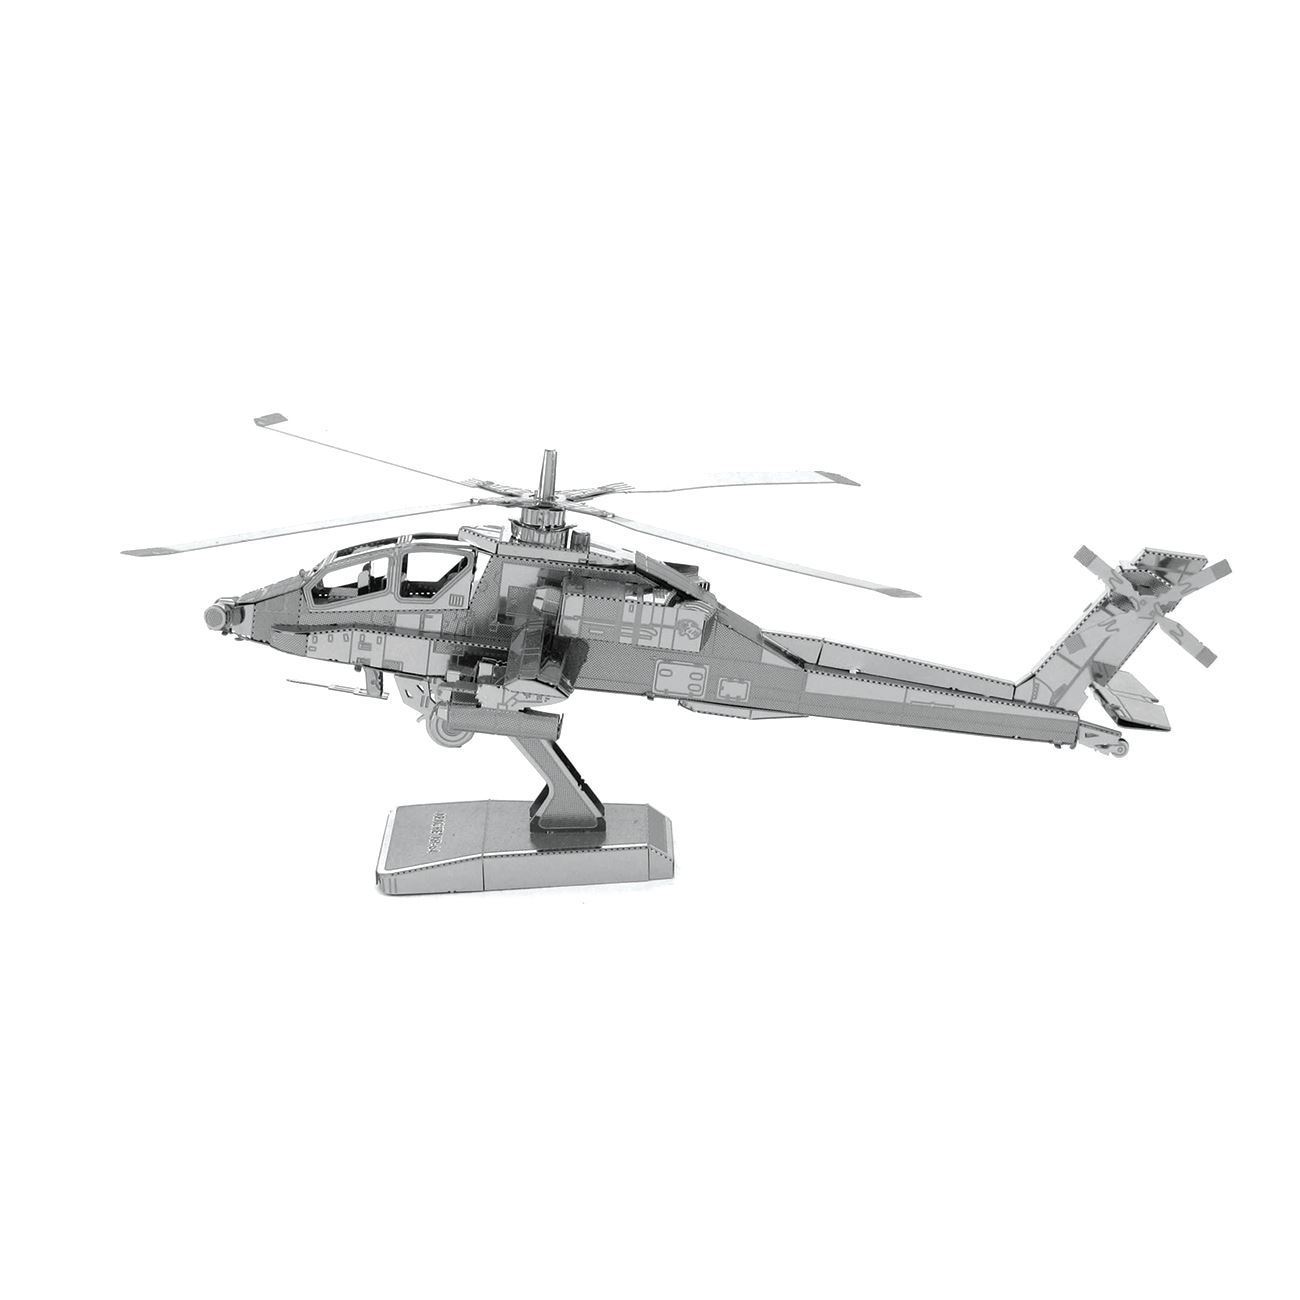 Set of 3 Metal Earth Helicopter Model Kits AH-64 Apache CH-47 Chinook UH-1 Huey 